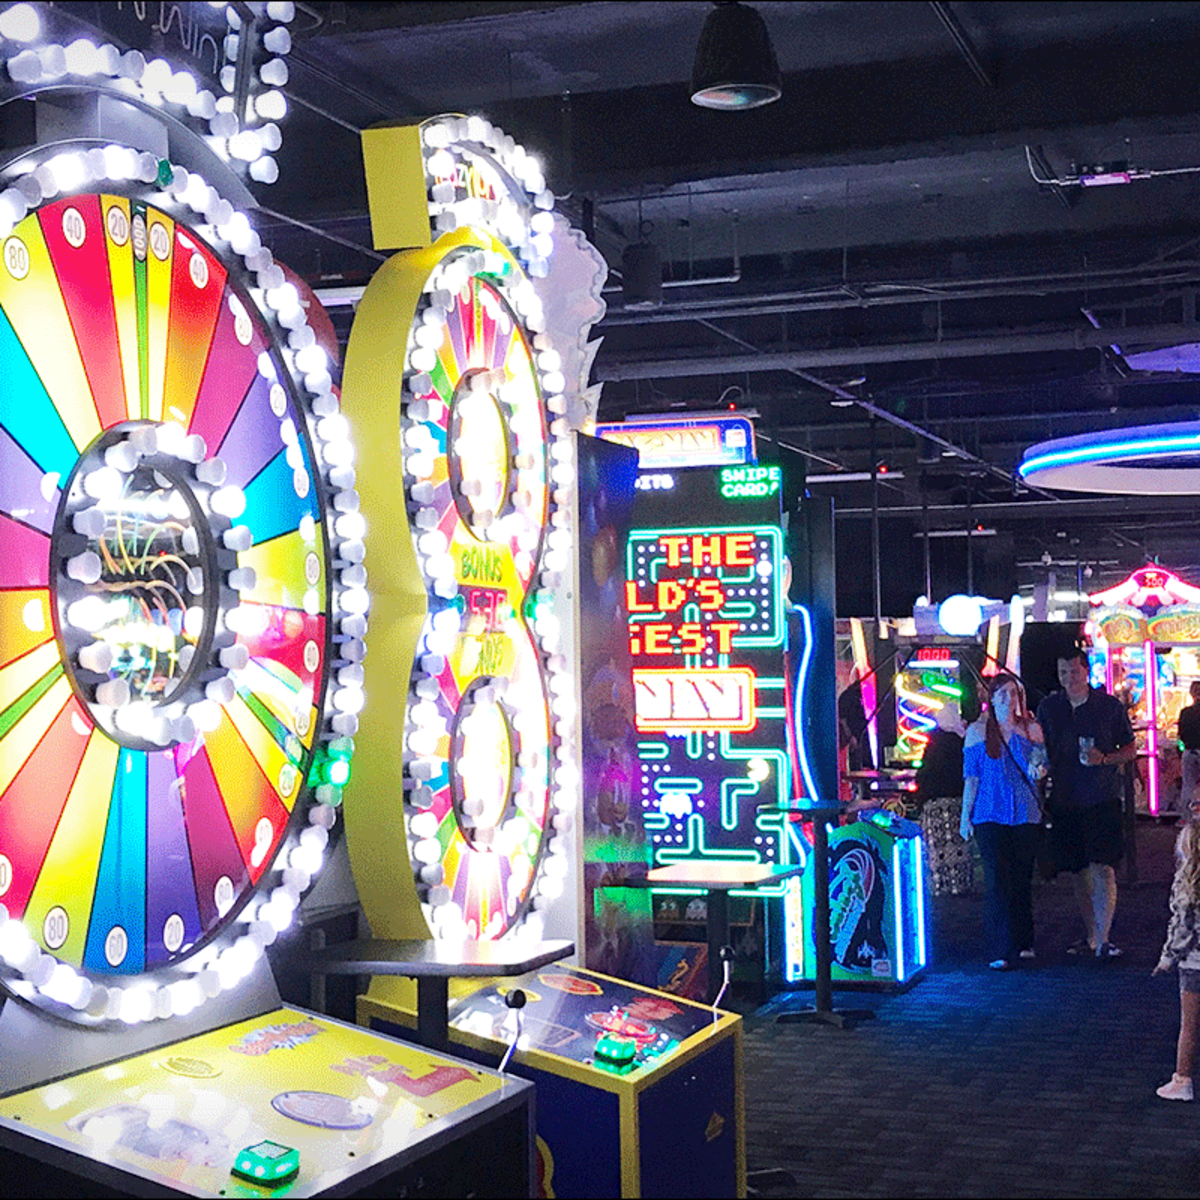 Dave & Buster's shares jump as revamped menu, new games boost sales